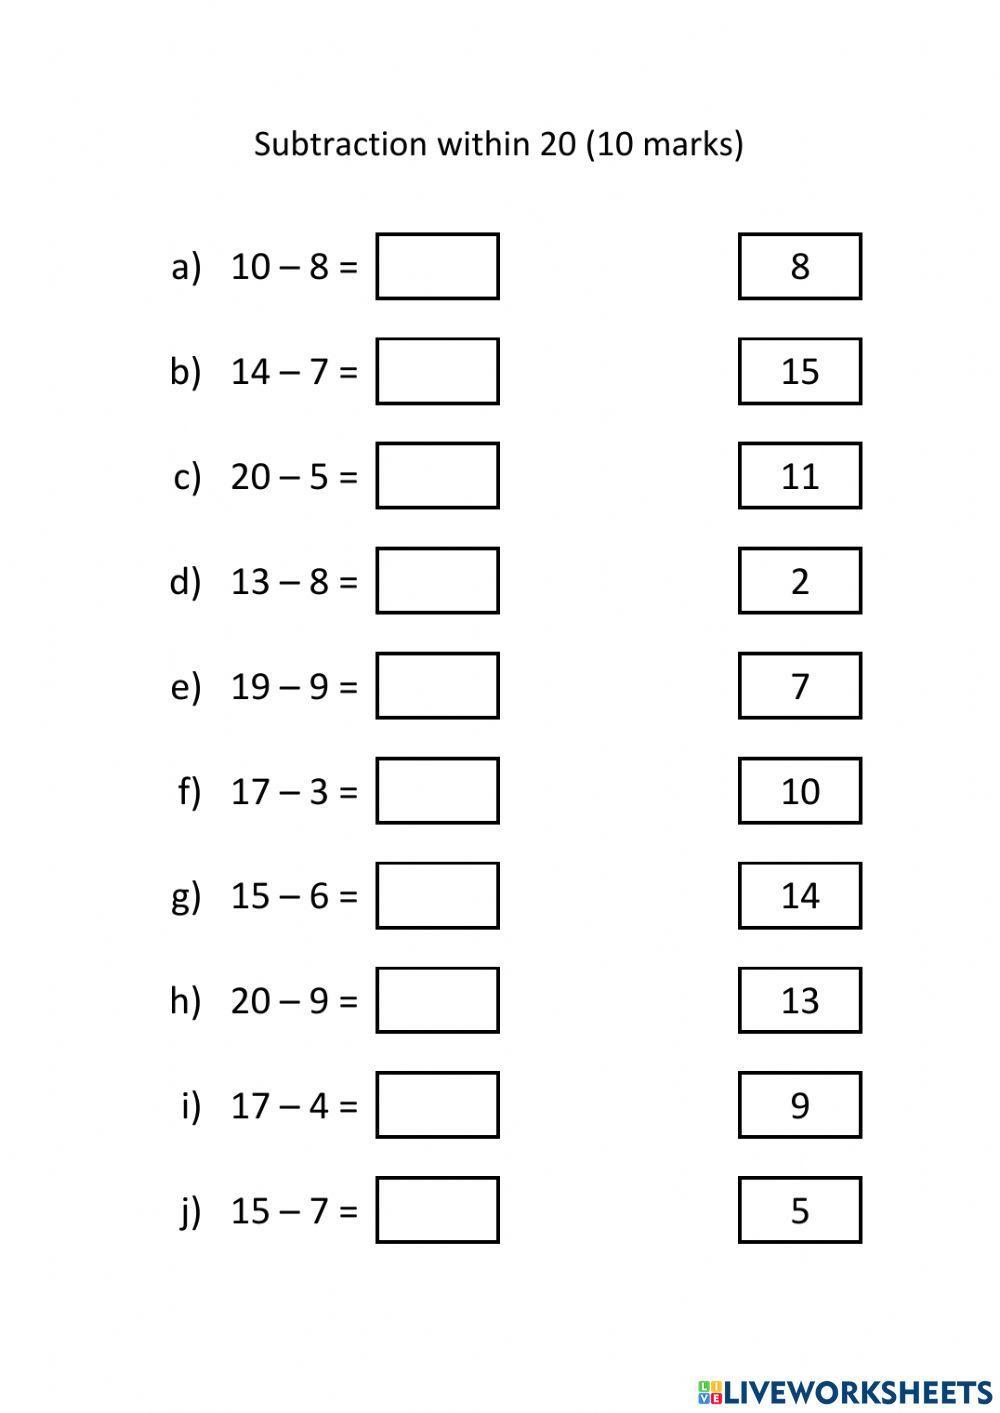 Subtraction within 20